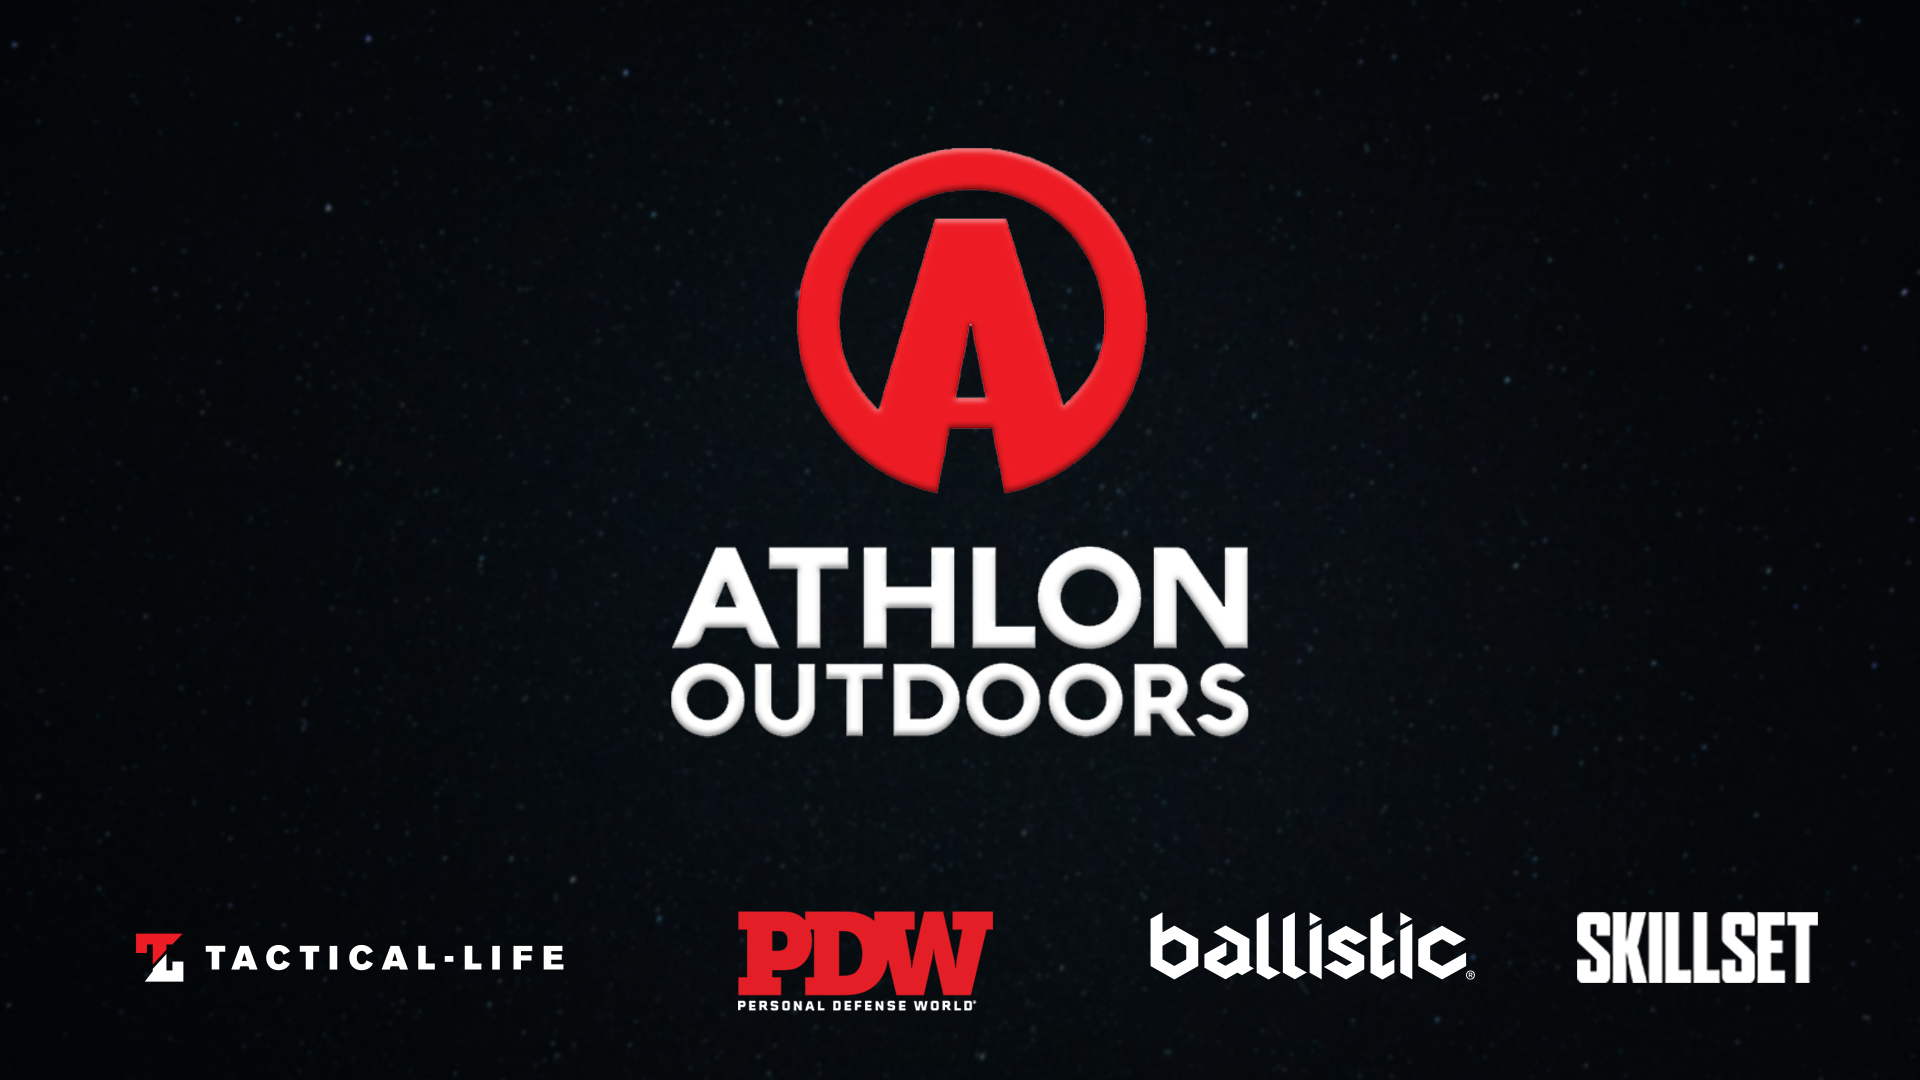 Athlon Outdoors Portfolio Acquired by Bleecker Street Publications